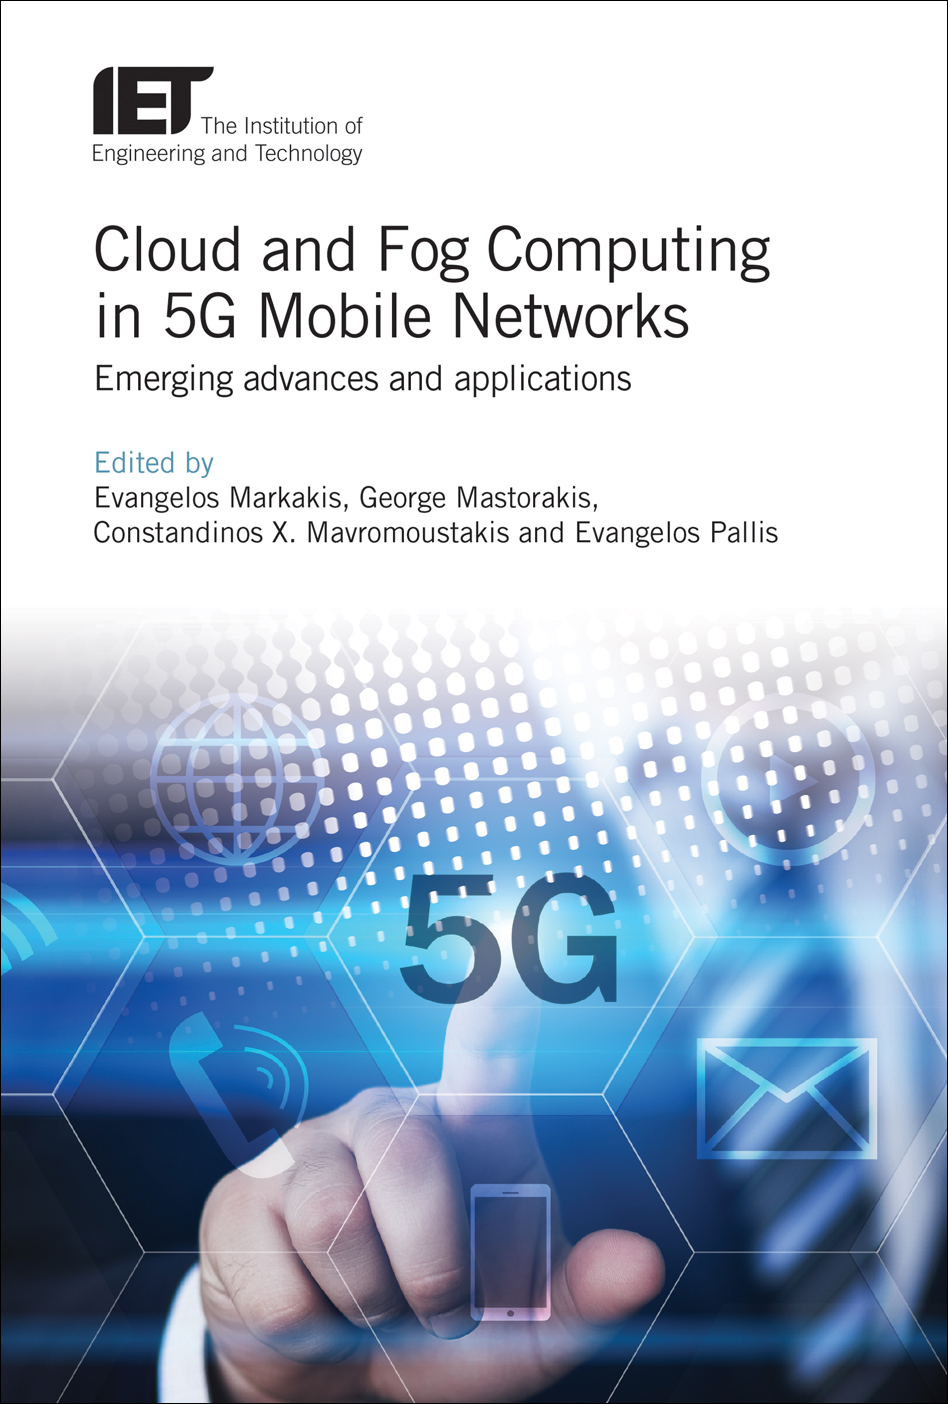 Cloud and Fog Computing in 5G Mobile Networks, Emerging advances and applications